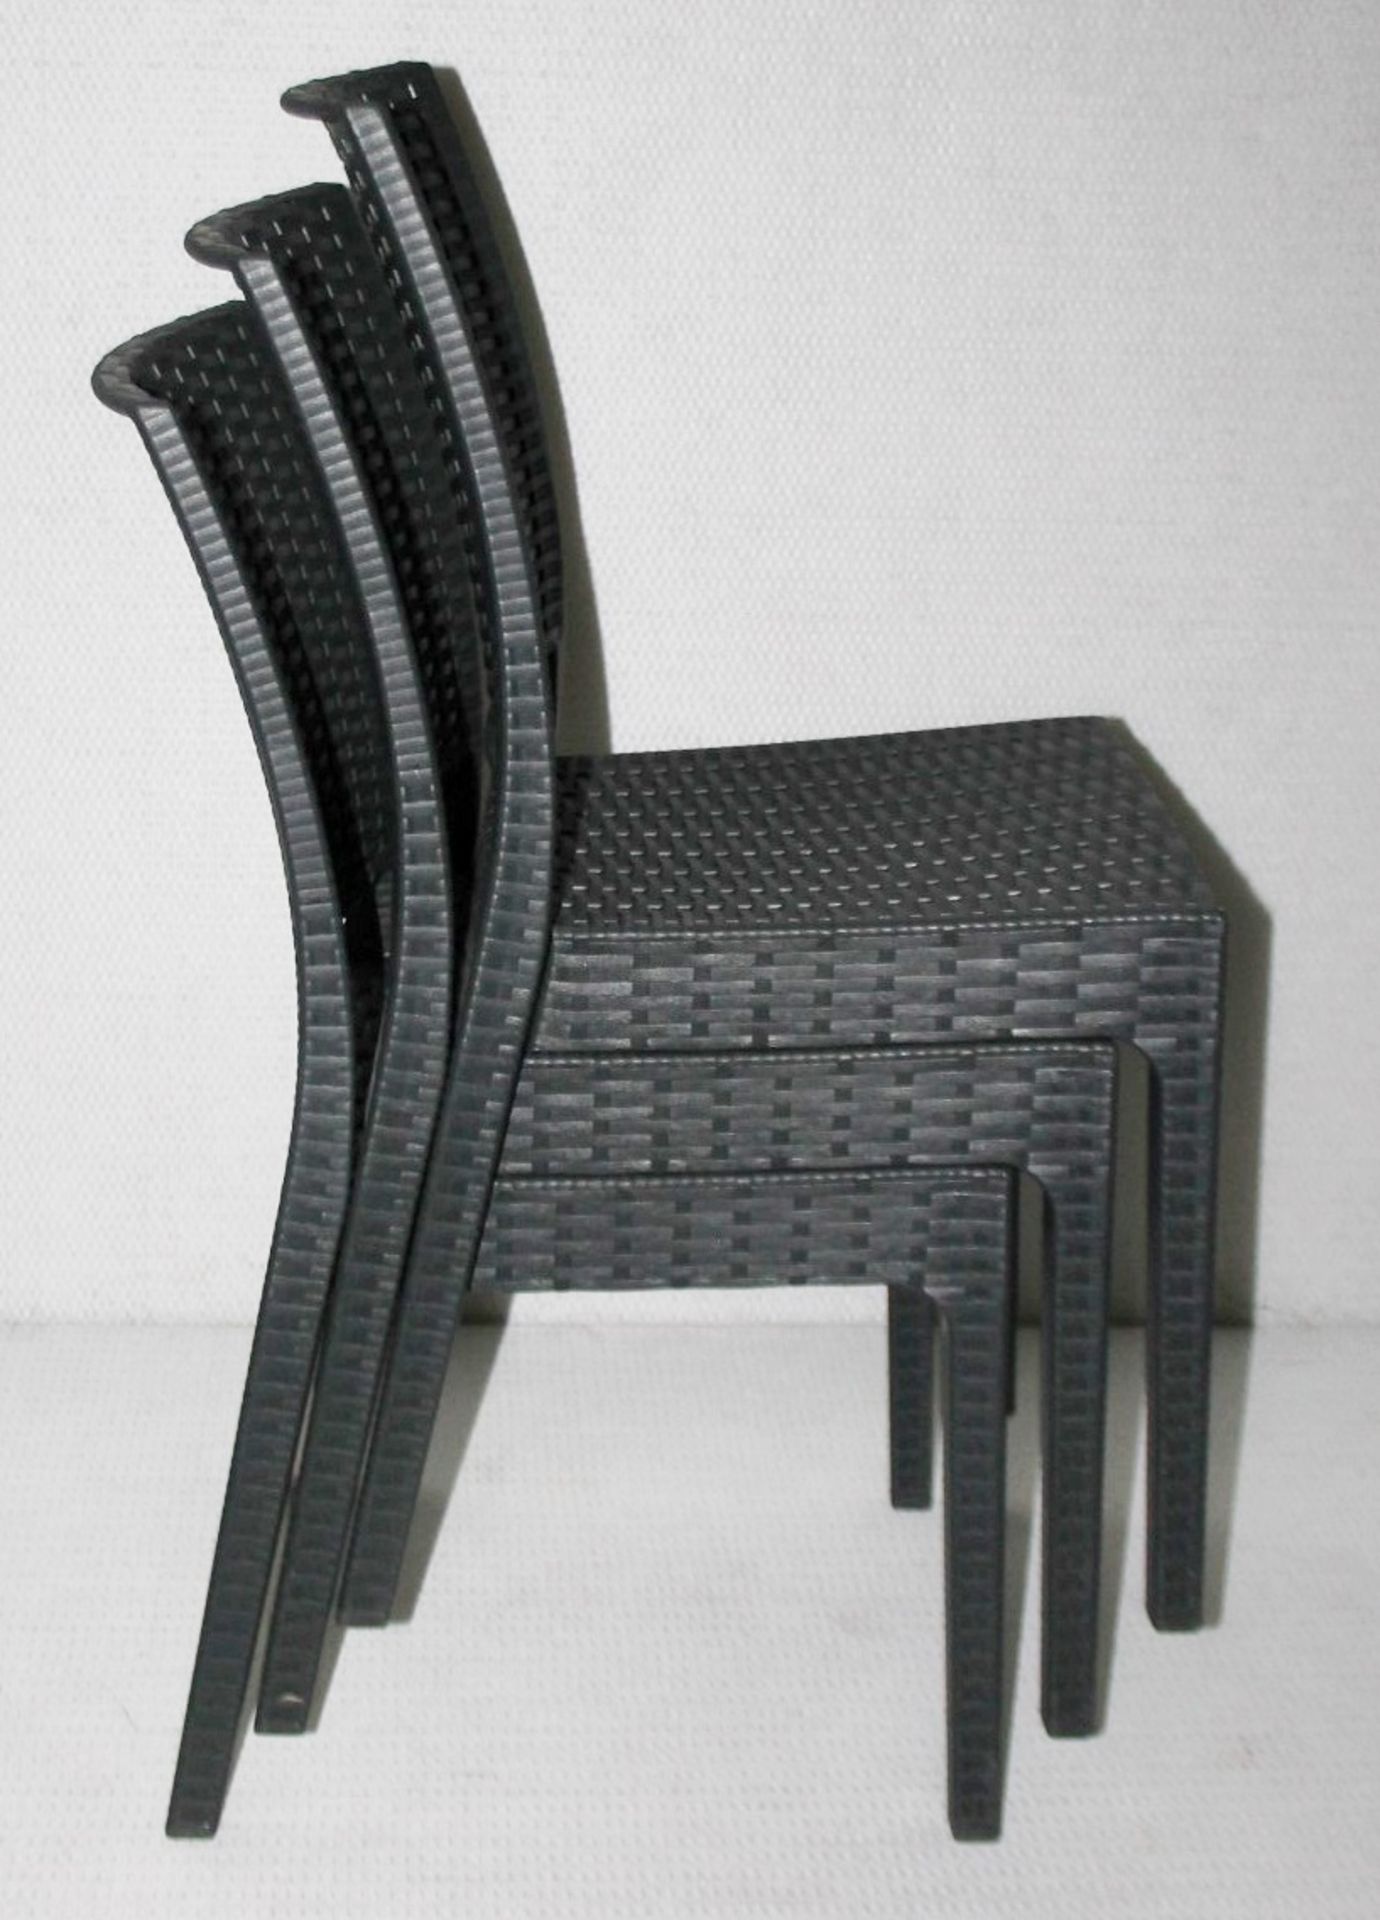 8 x SIESTA EXCLUSIVE 'Florida' Commercial Stackable Rattan-style Chairs In Dark Grey - CL987 - - Image 12 of 13